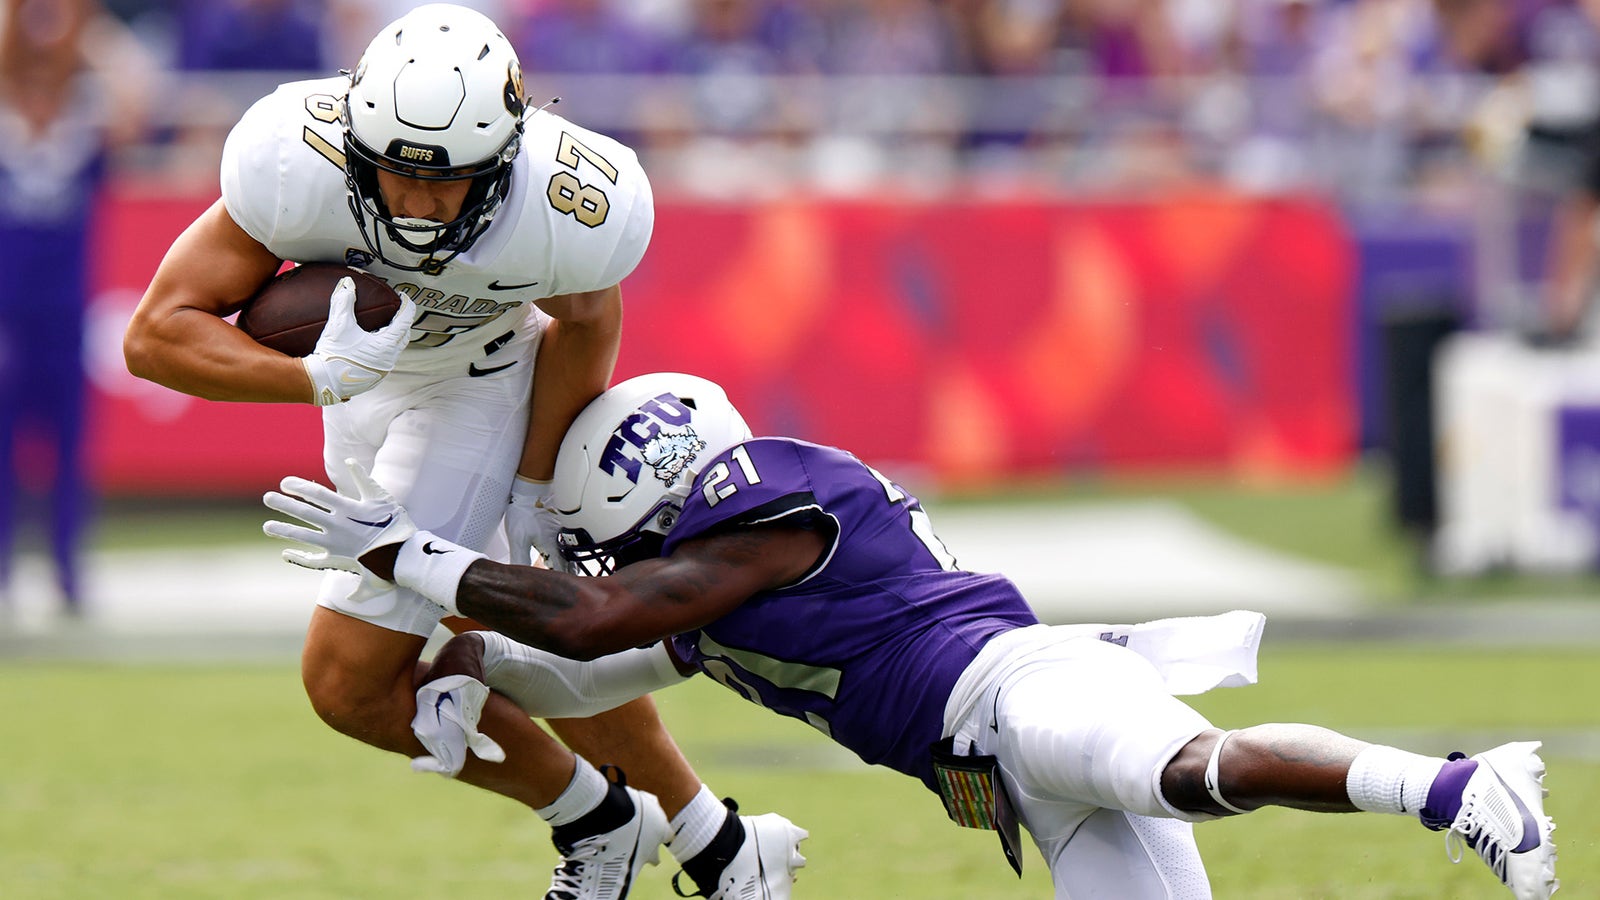 Highlights: All the top plays from wild Colorado-TCU game!